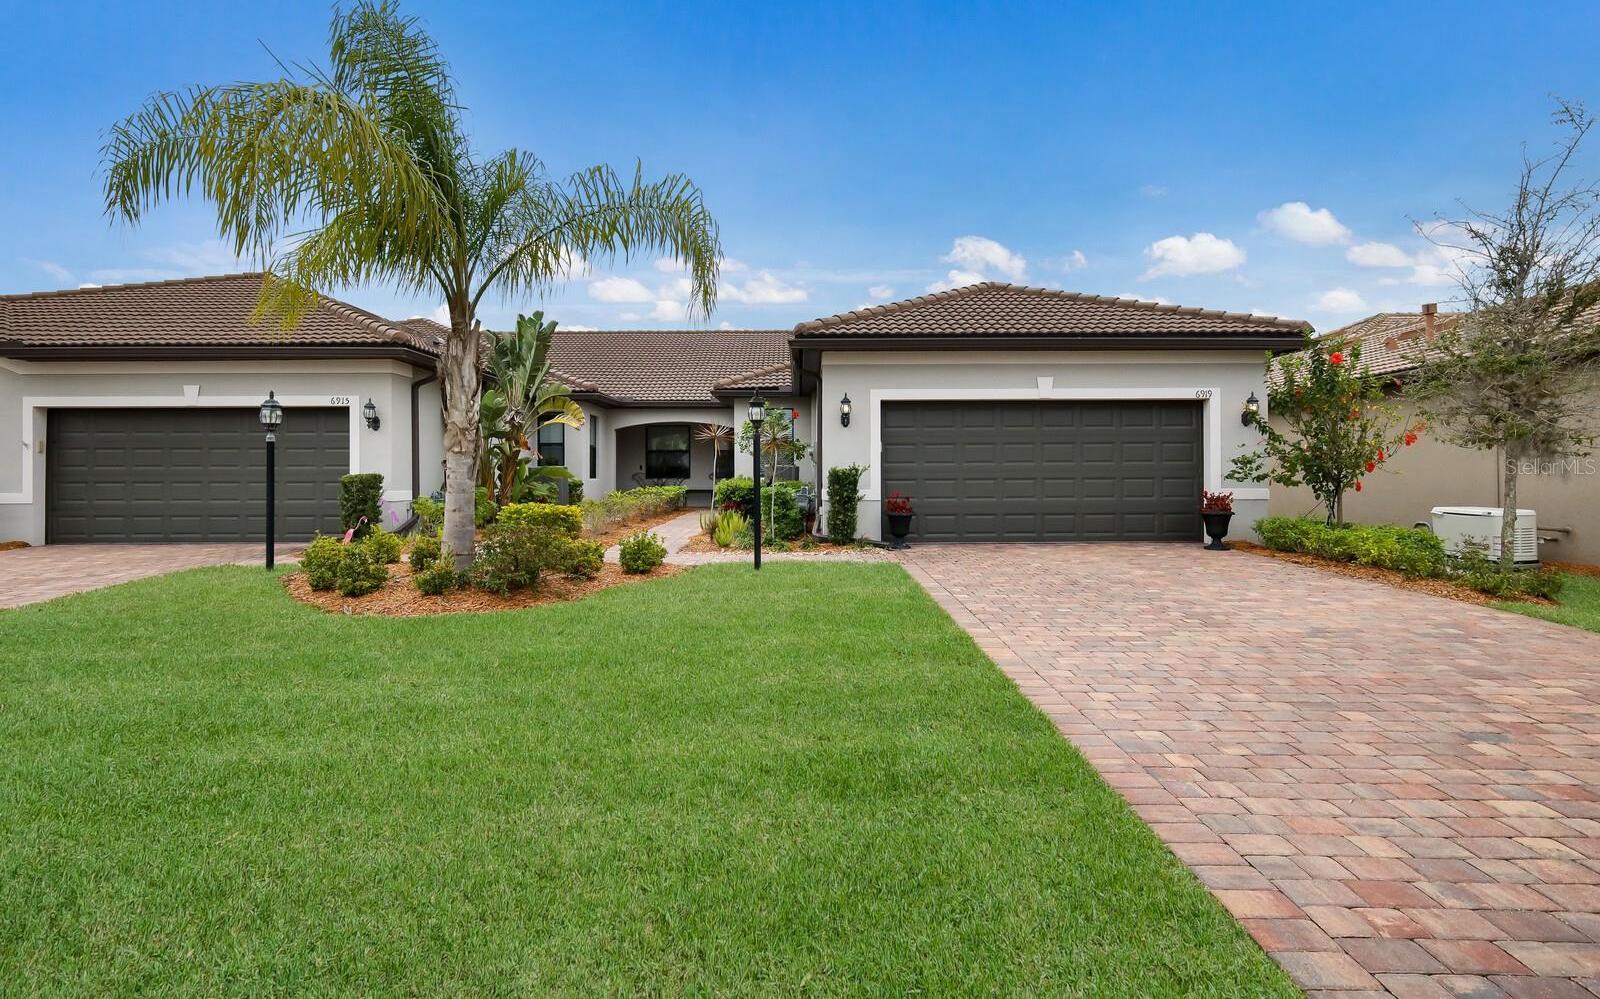 Photo one of 6919 Dorset Ct Lakewood Ranch FL 34202 | MLS A4602356